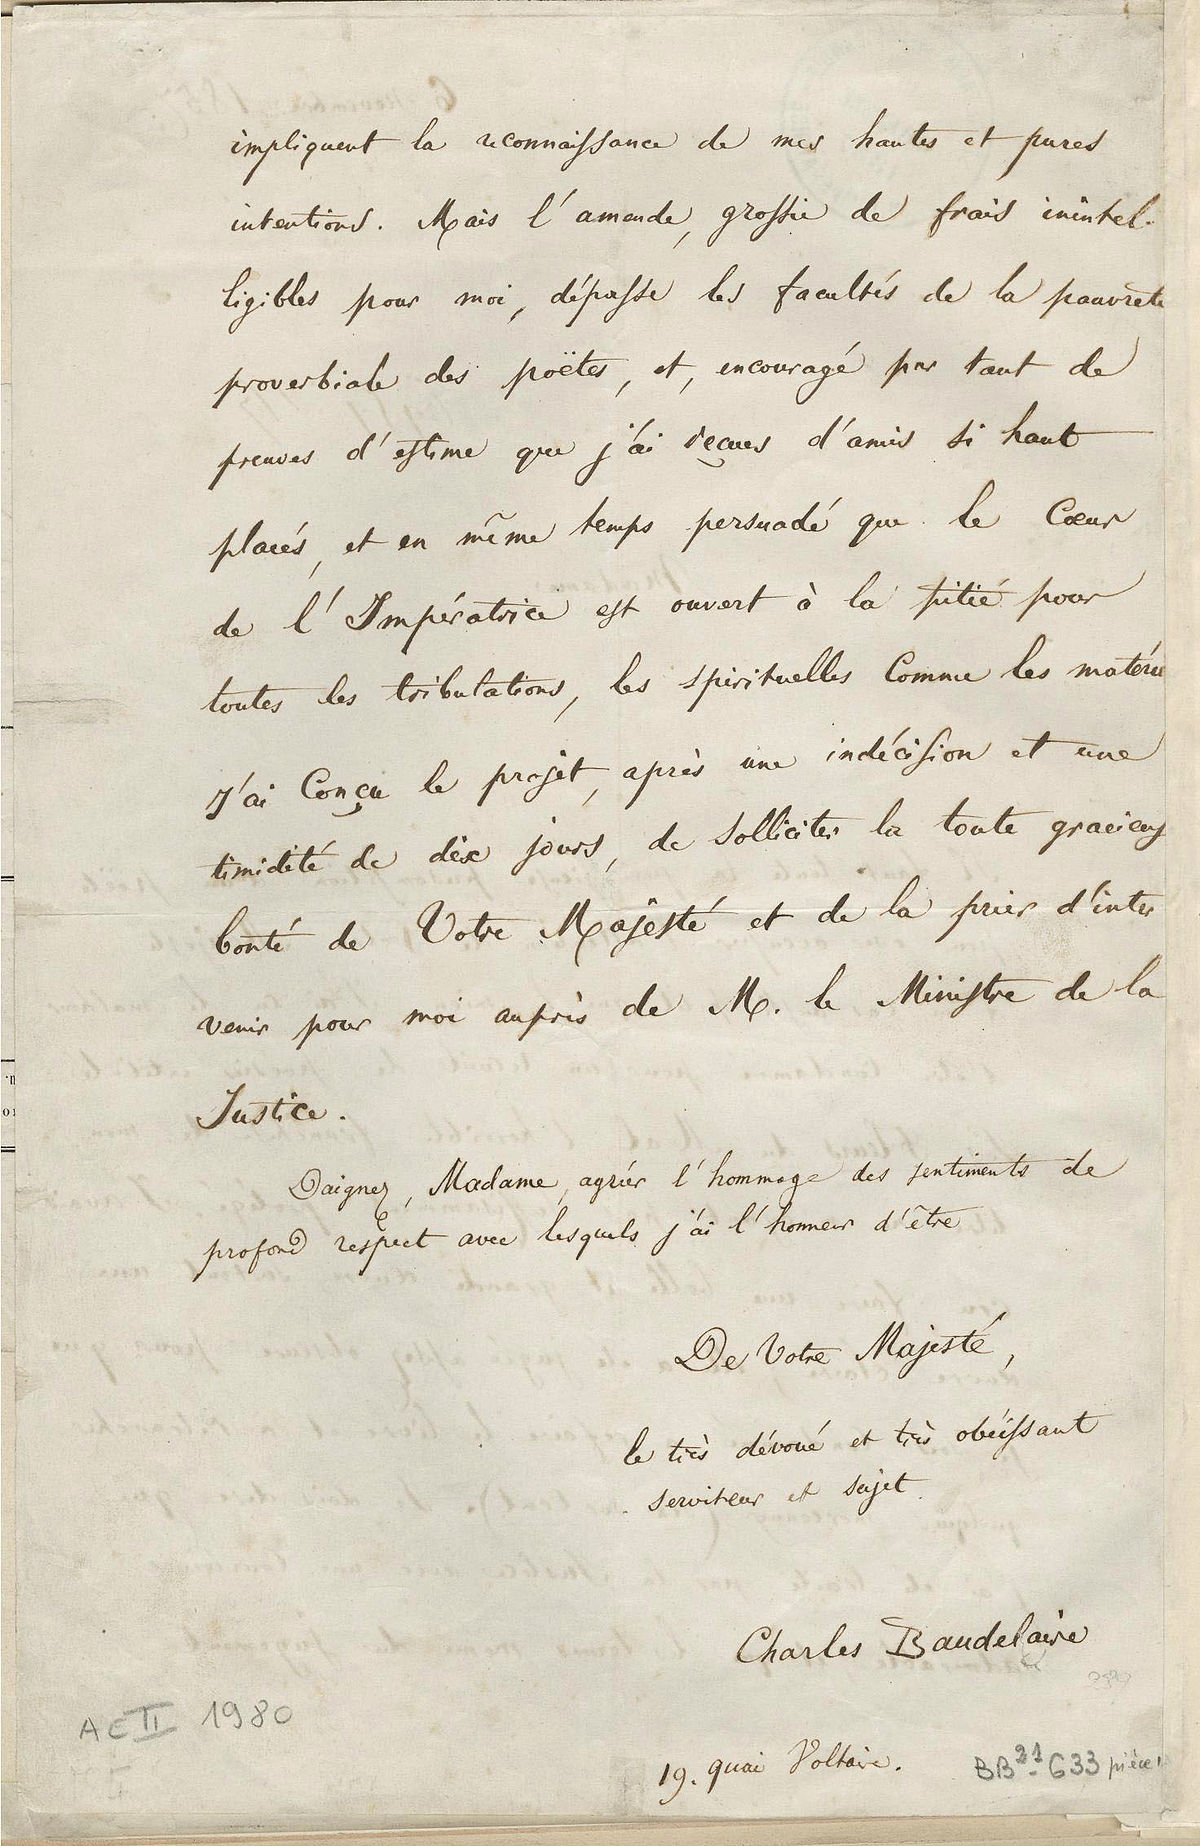 Datei Lettre De Charles Baudelaire A L Imperatrice Eugenie 2 Archives Nationales Ae Ii 1980 Jpg Wikipedia